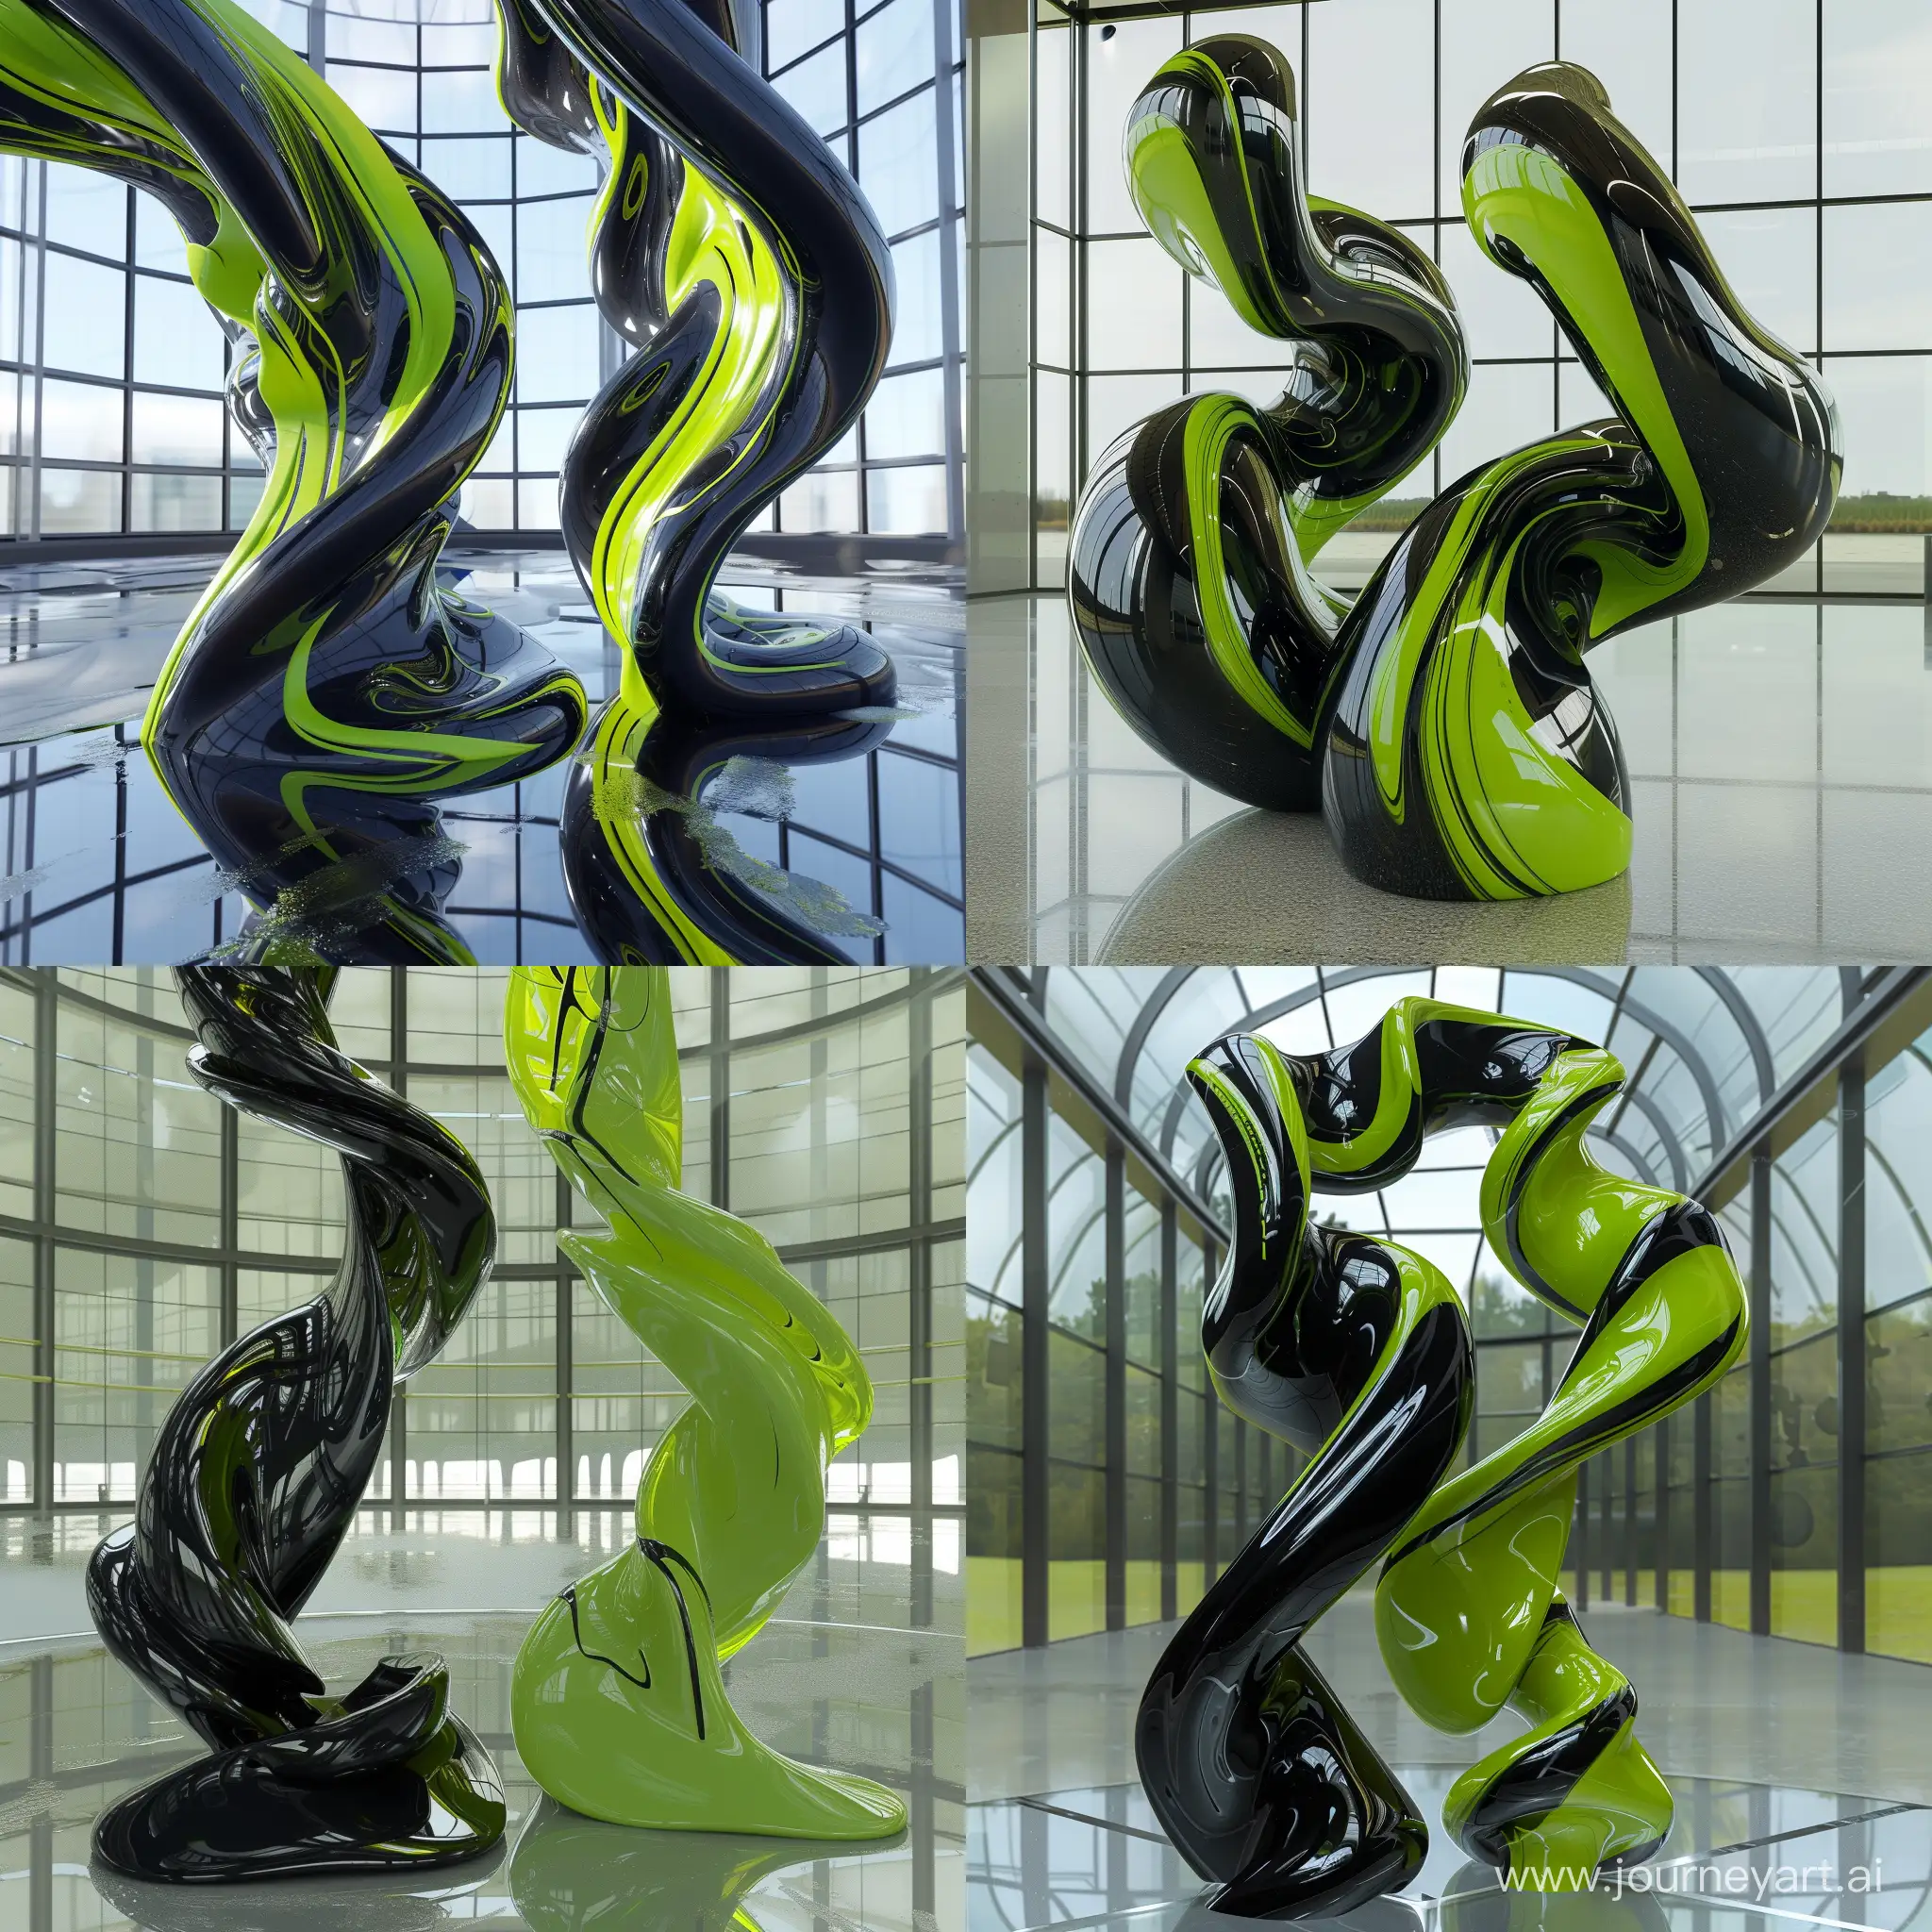 Mesmerizing-Black-and-Lime-Green-Paint-Fusion-in-Glass-Room